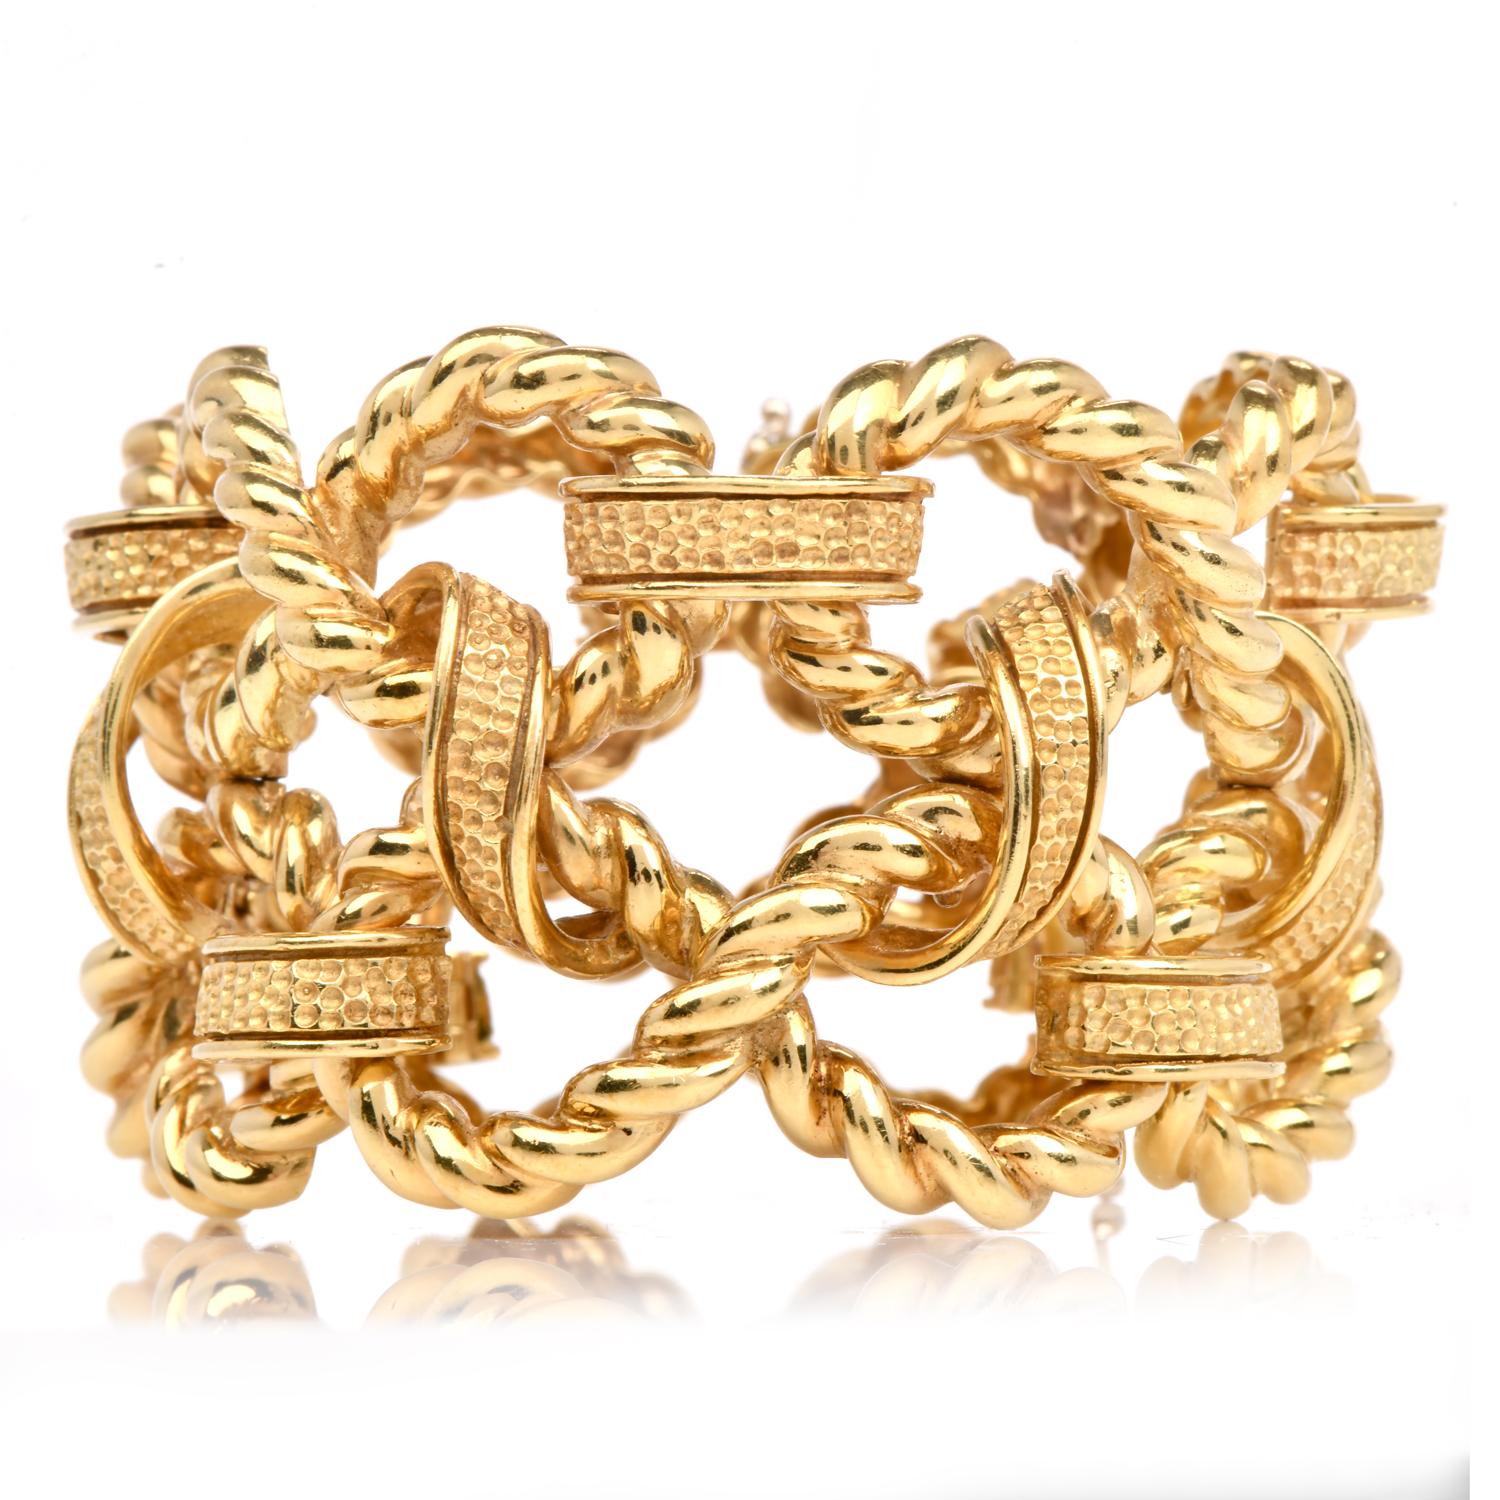 This Italian artistry late 1970 vintage bracelet is made in Heavy 18k yellow gold .

It boasts two rows of solid gold infinity links, masterfully woven together with a textured ribbon design, embodying eternal beauty and sophistication.

This